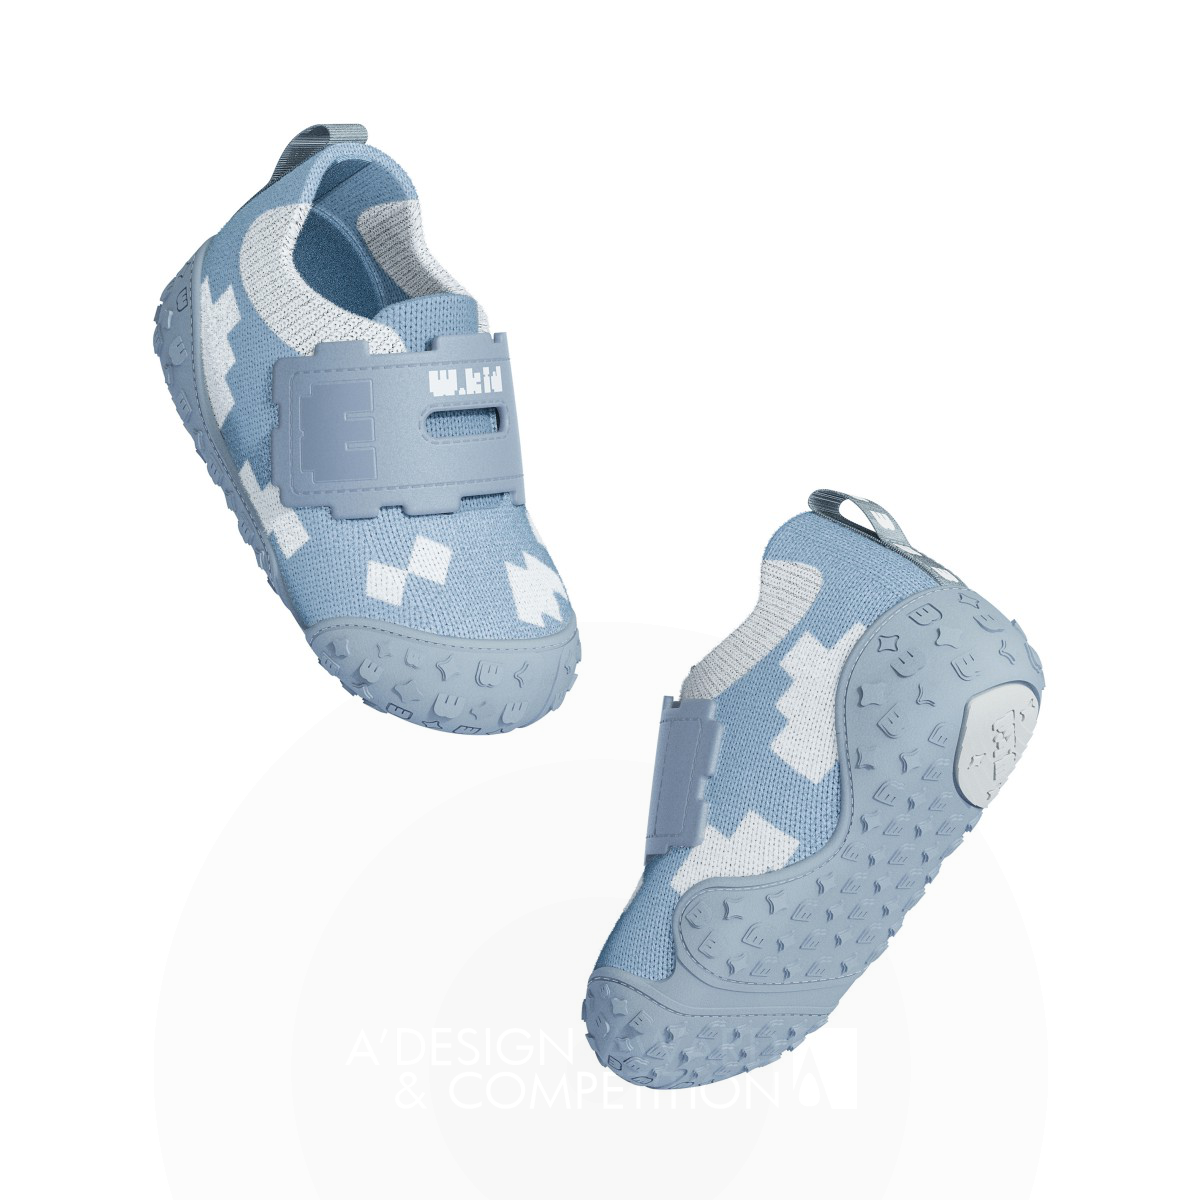 Winner Medical Co.,Ltd. wins Bronze at the prestigious A' Baby, Kids and Children's Products Design Award with Tiny Steps Flex Shoes.